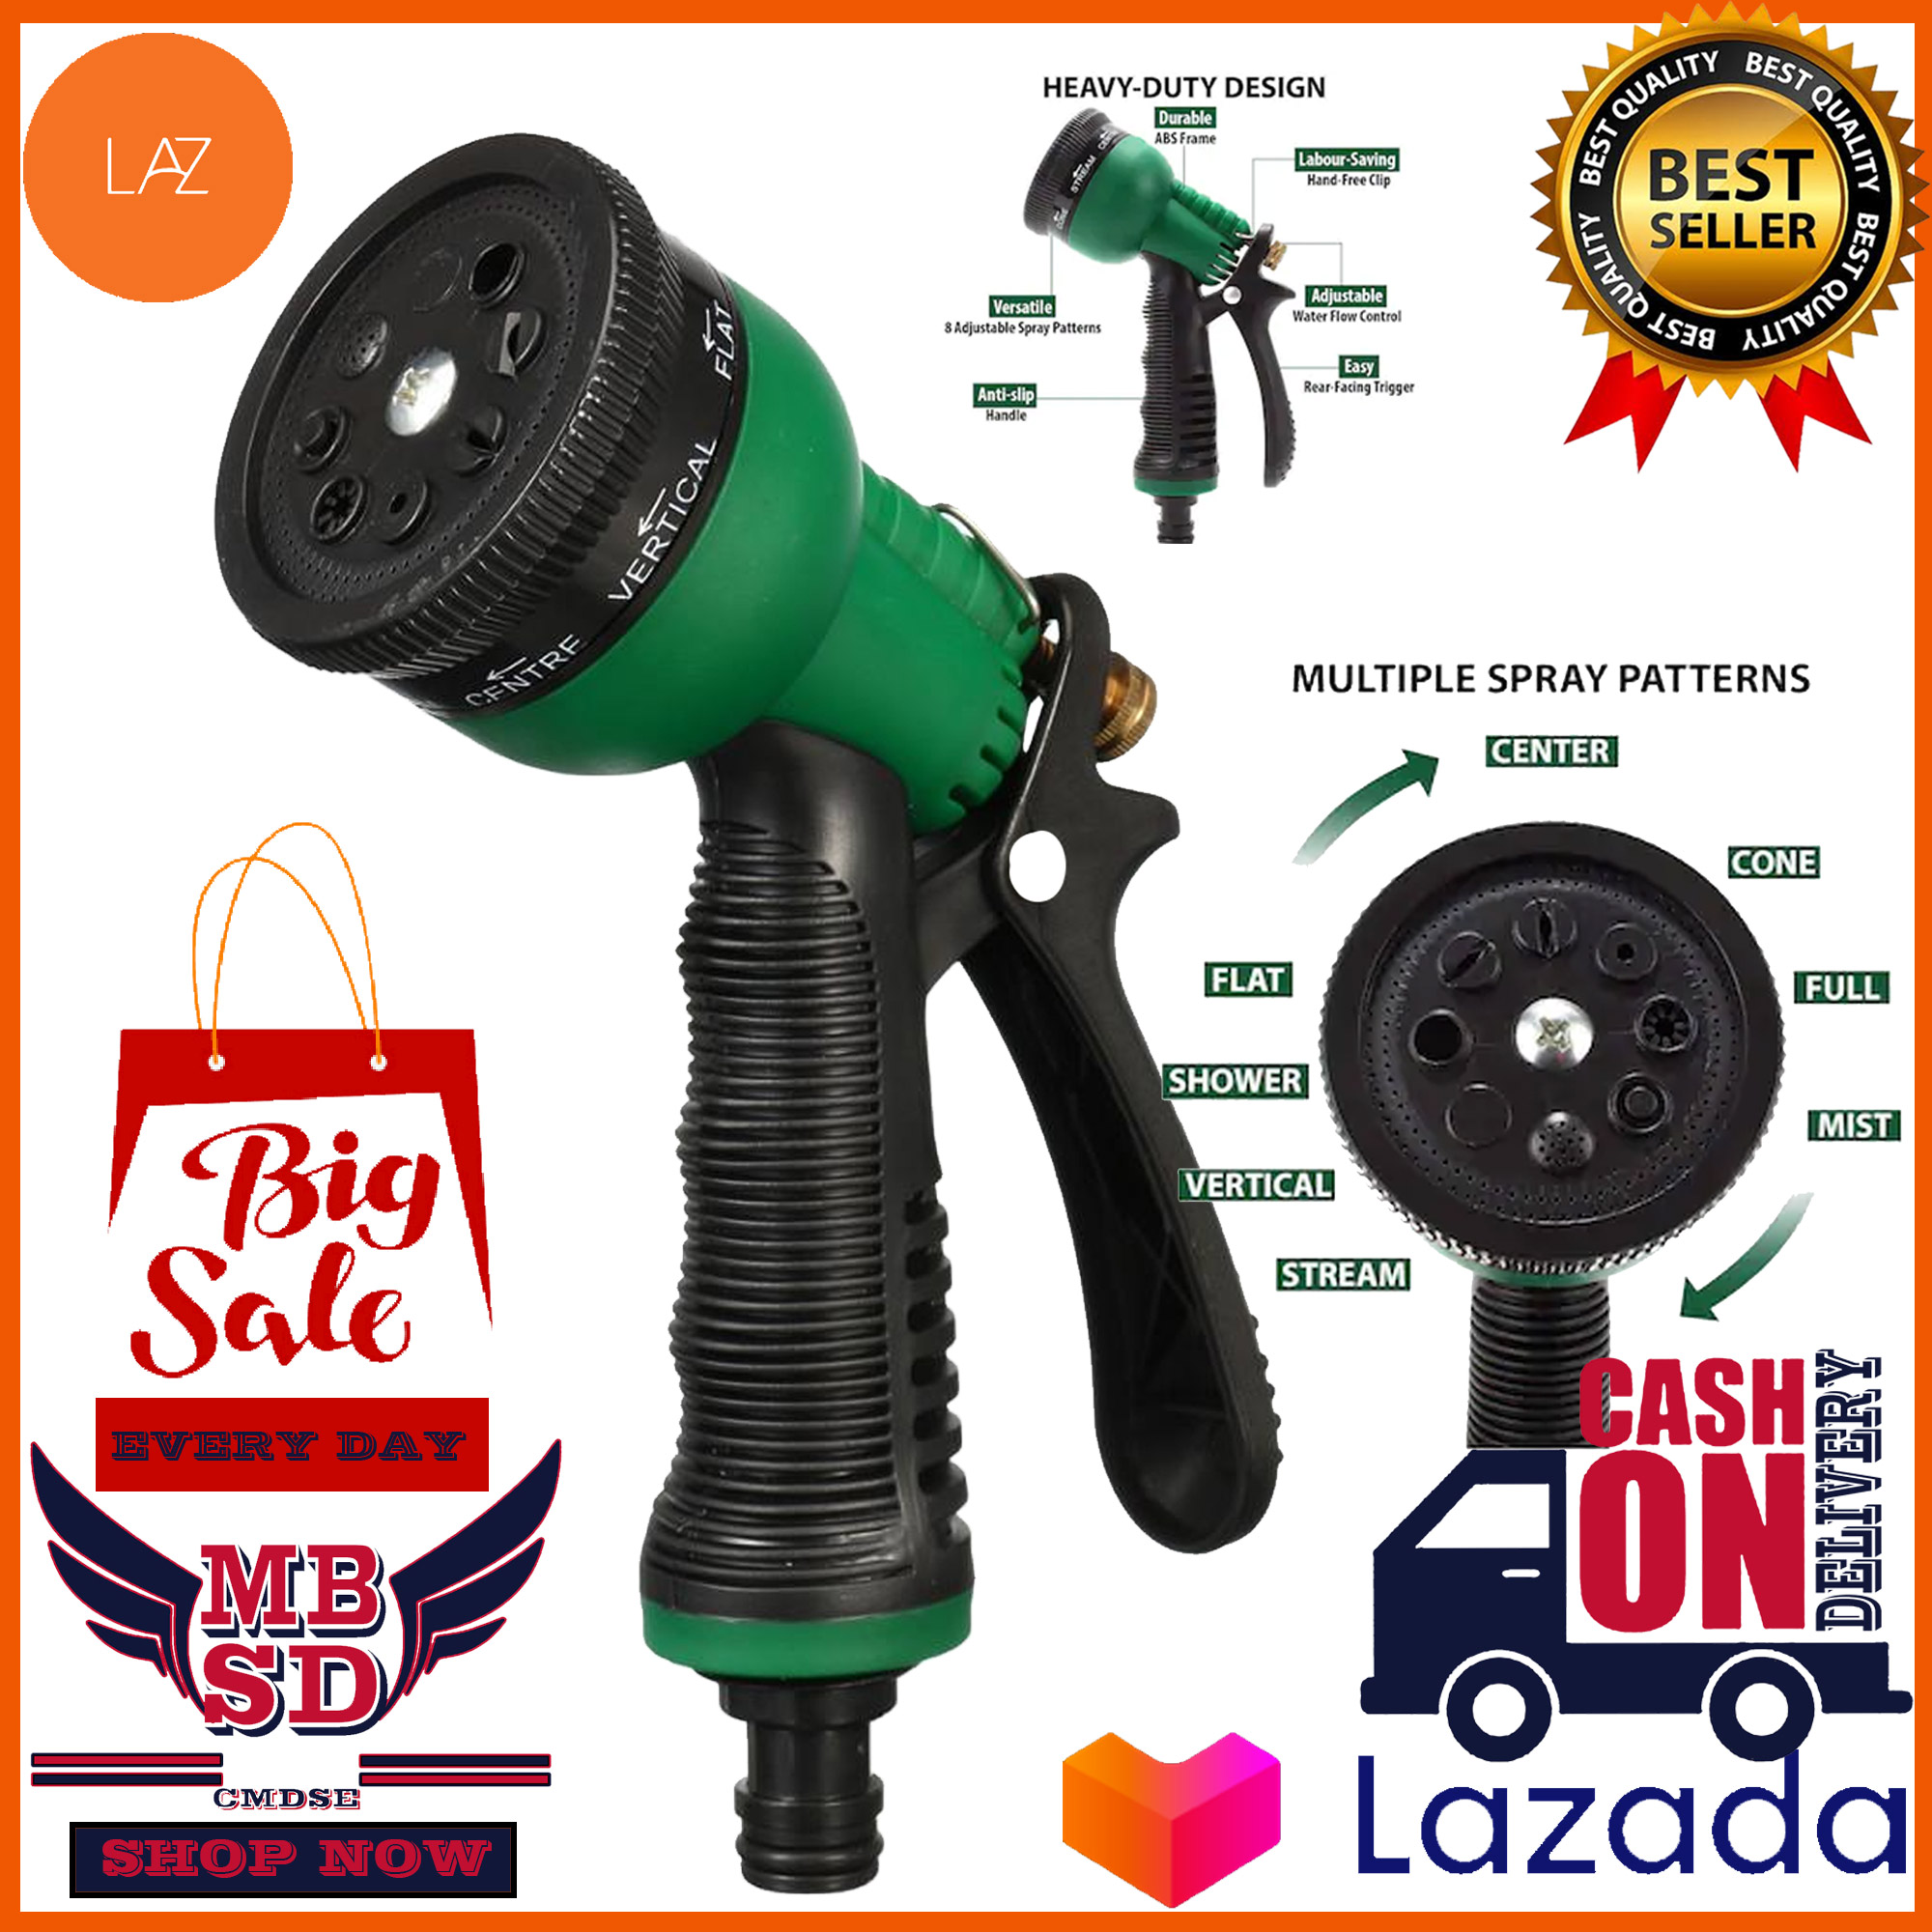 Cleaning & Car Washing YESTAR Hose Nozzle Garden with 8 Spray Patterns,Heavy Duty Metal Water Hose Nozzle Sprayer,Best for Watering Lawns and Garden 